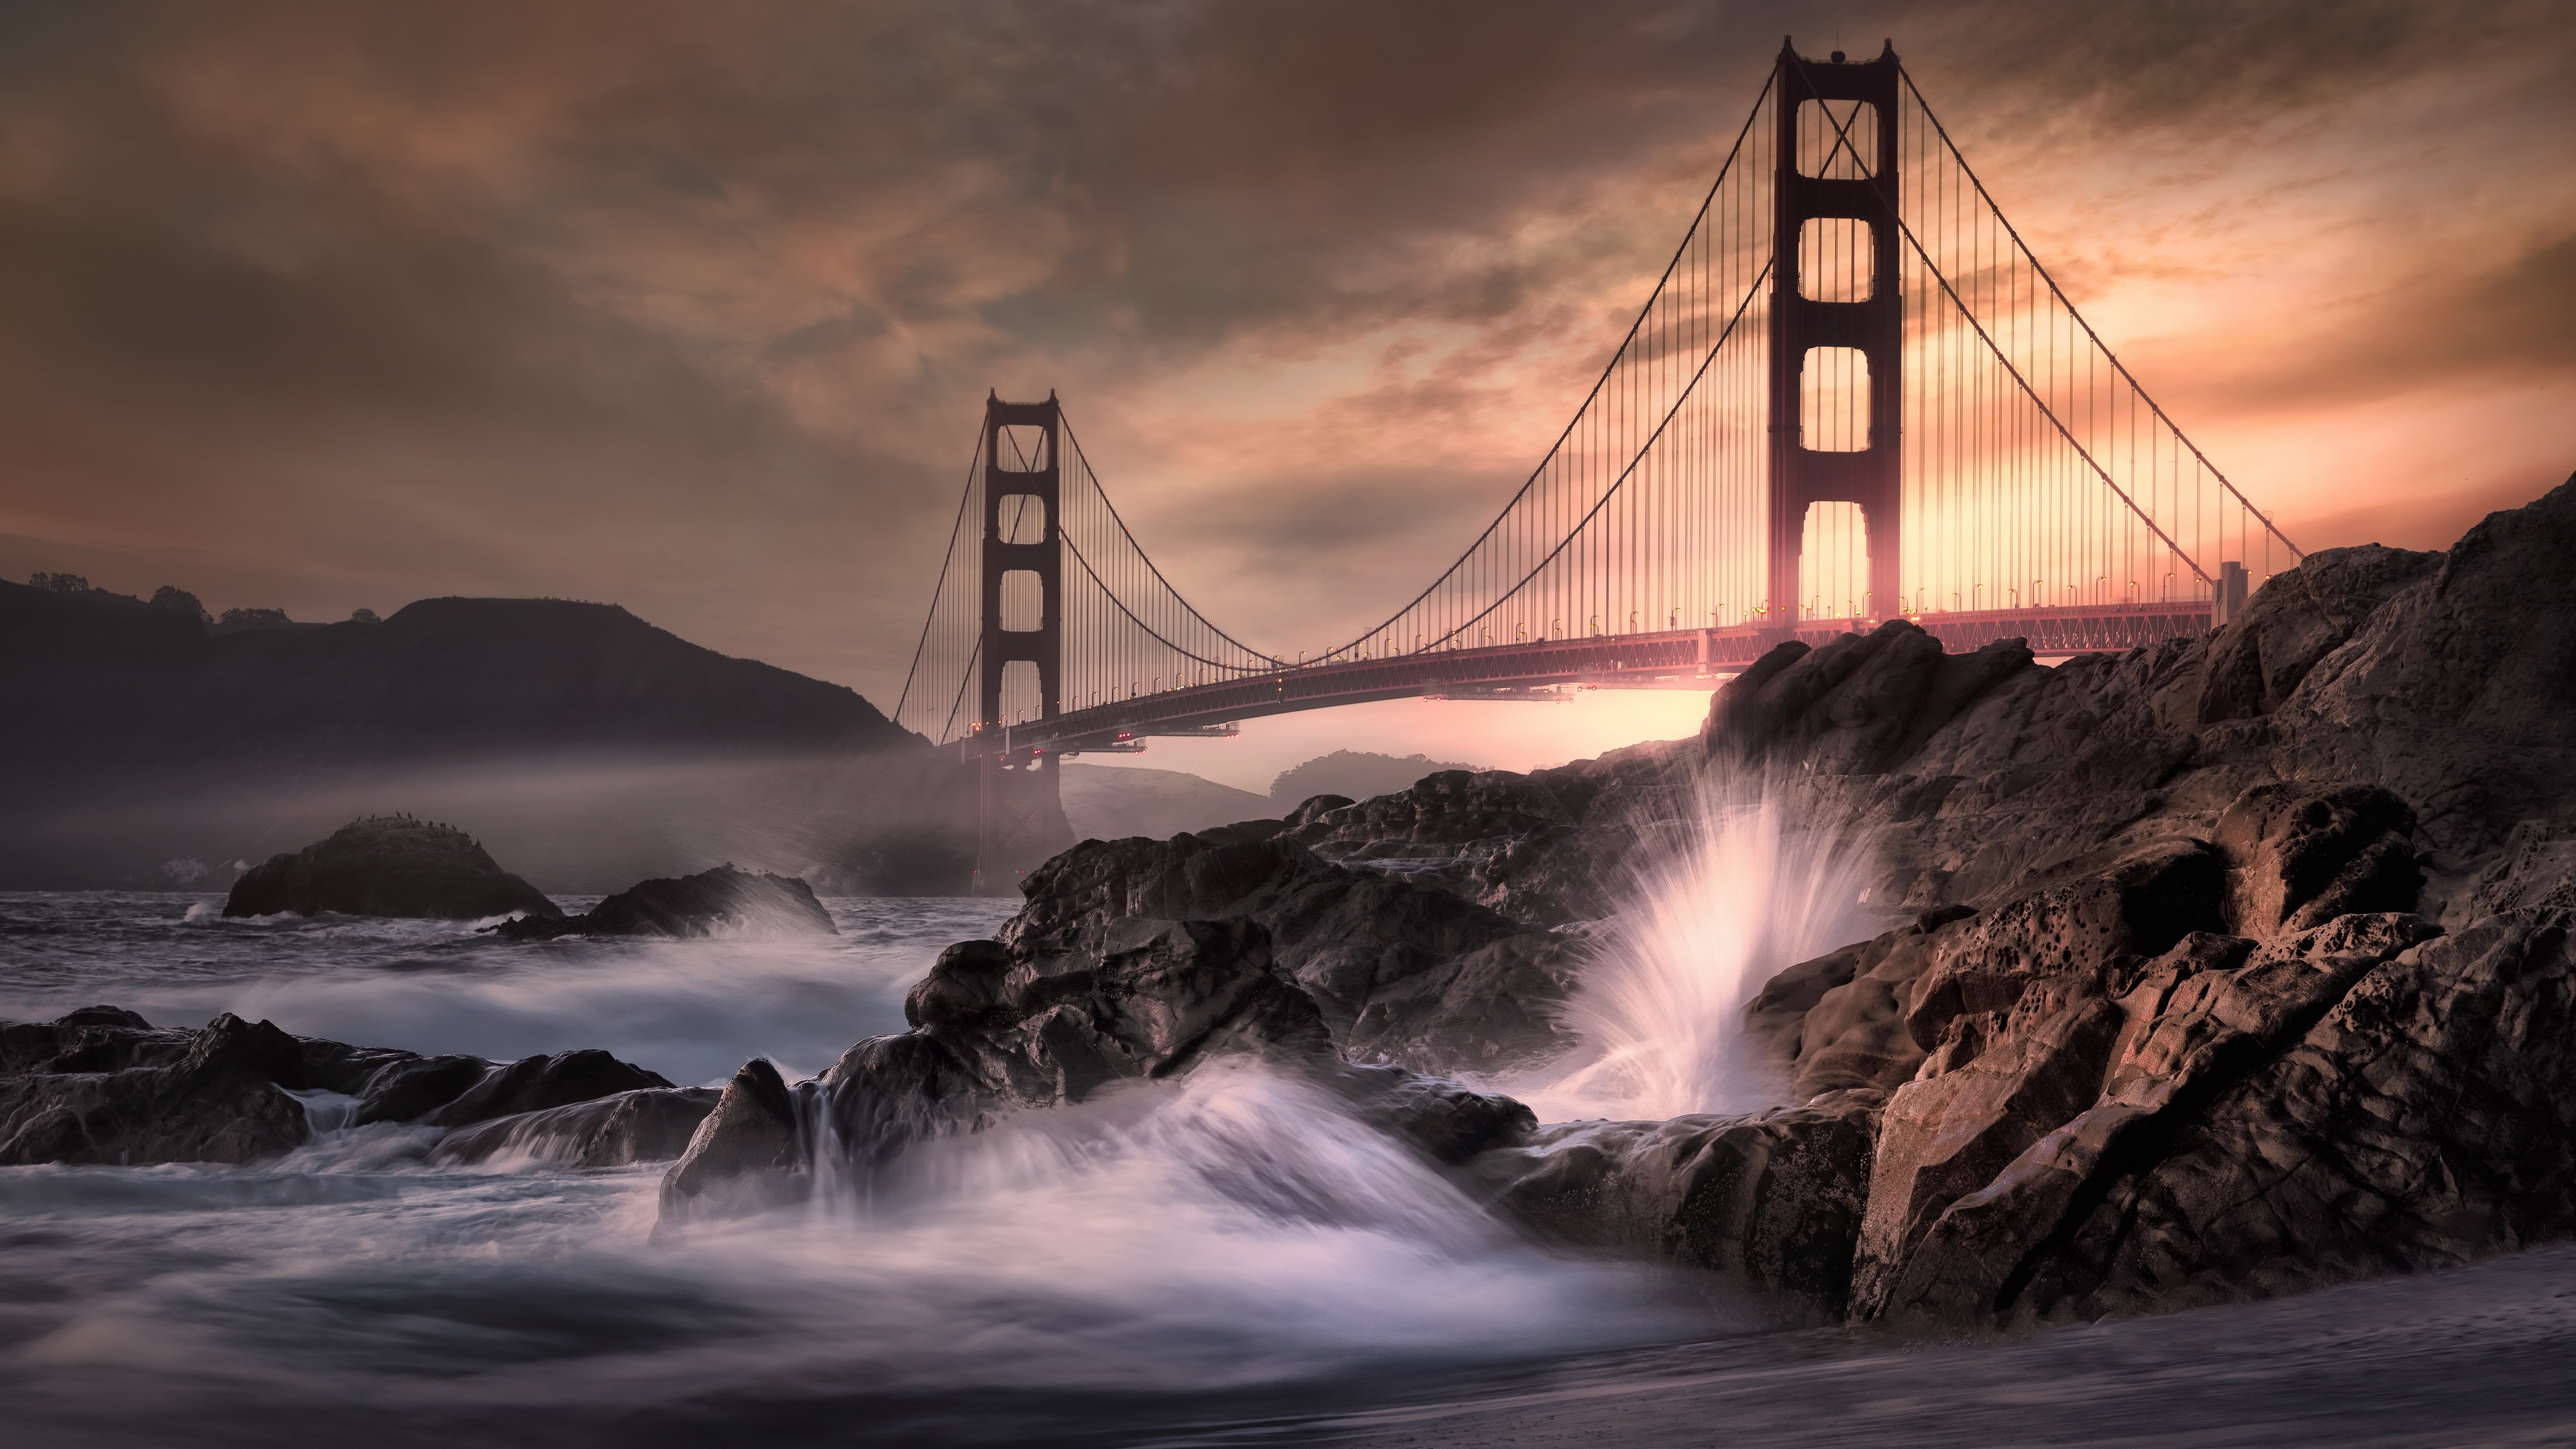 Free photo The Red Bridge in California at sunset